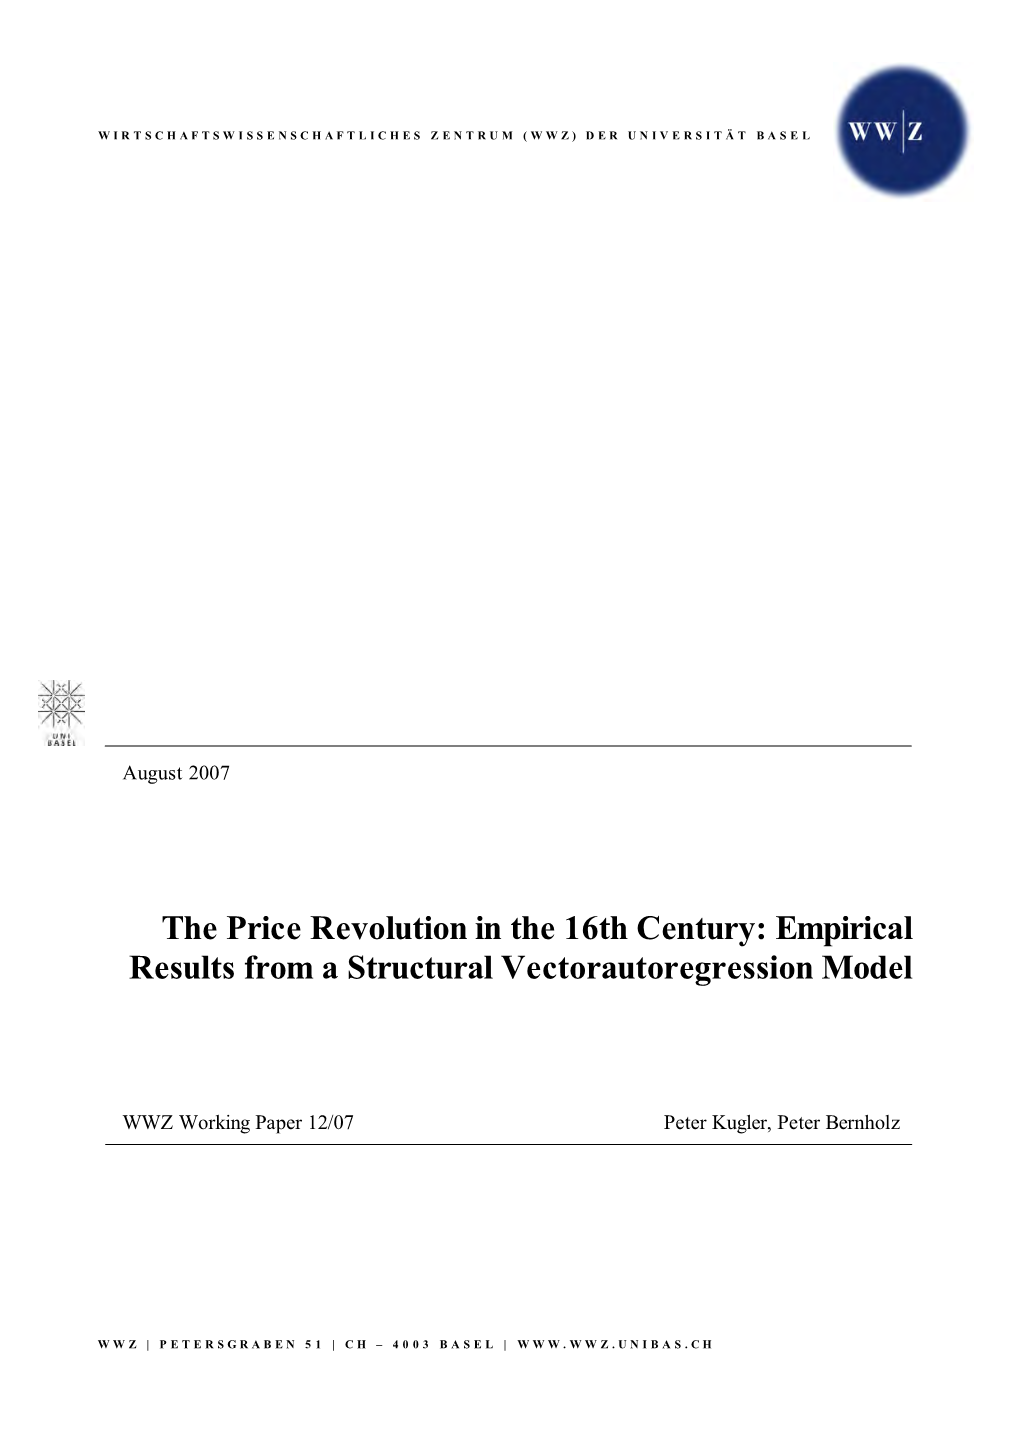 The Price Revolution in the 16Th Century: Empirical Results from a Structural Vectorautoregression Model